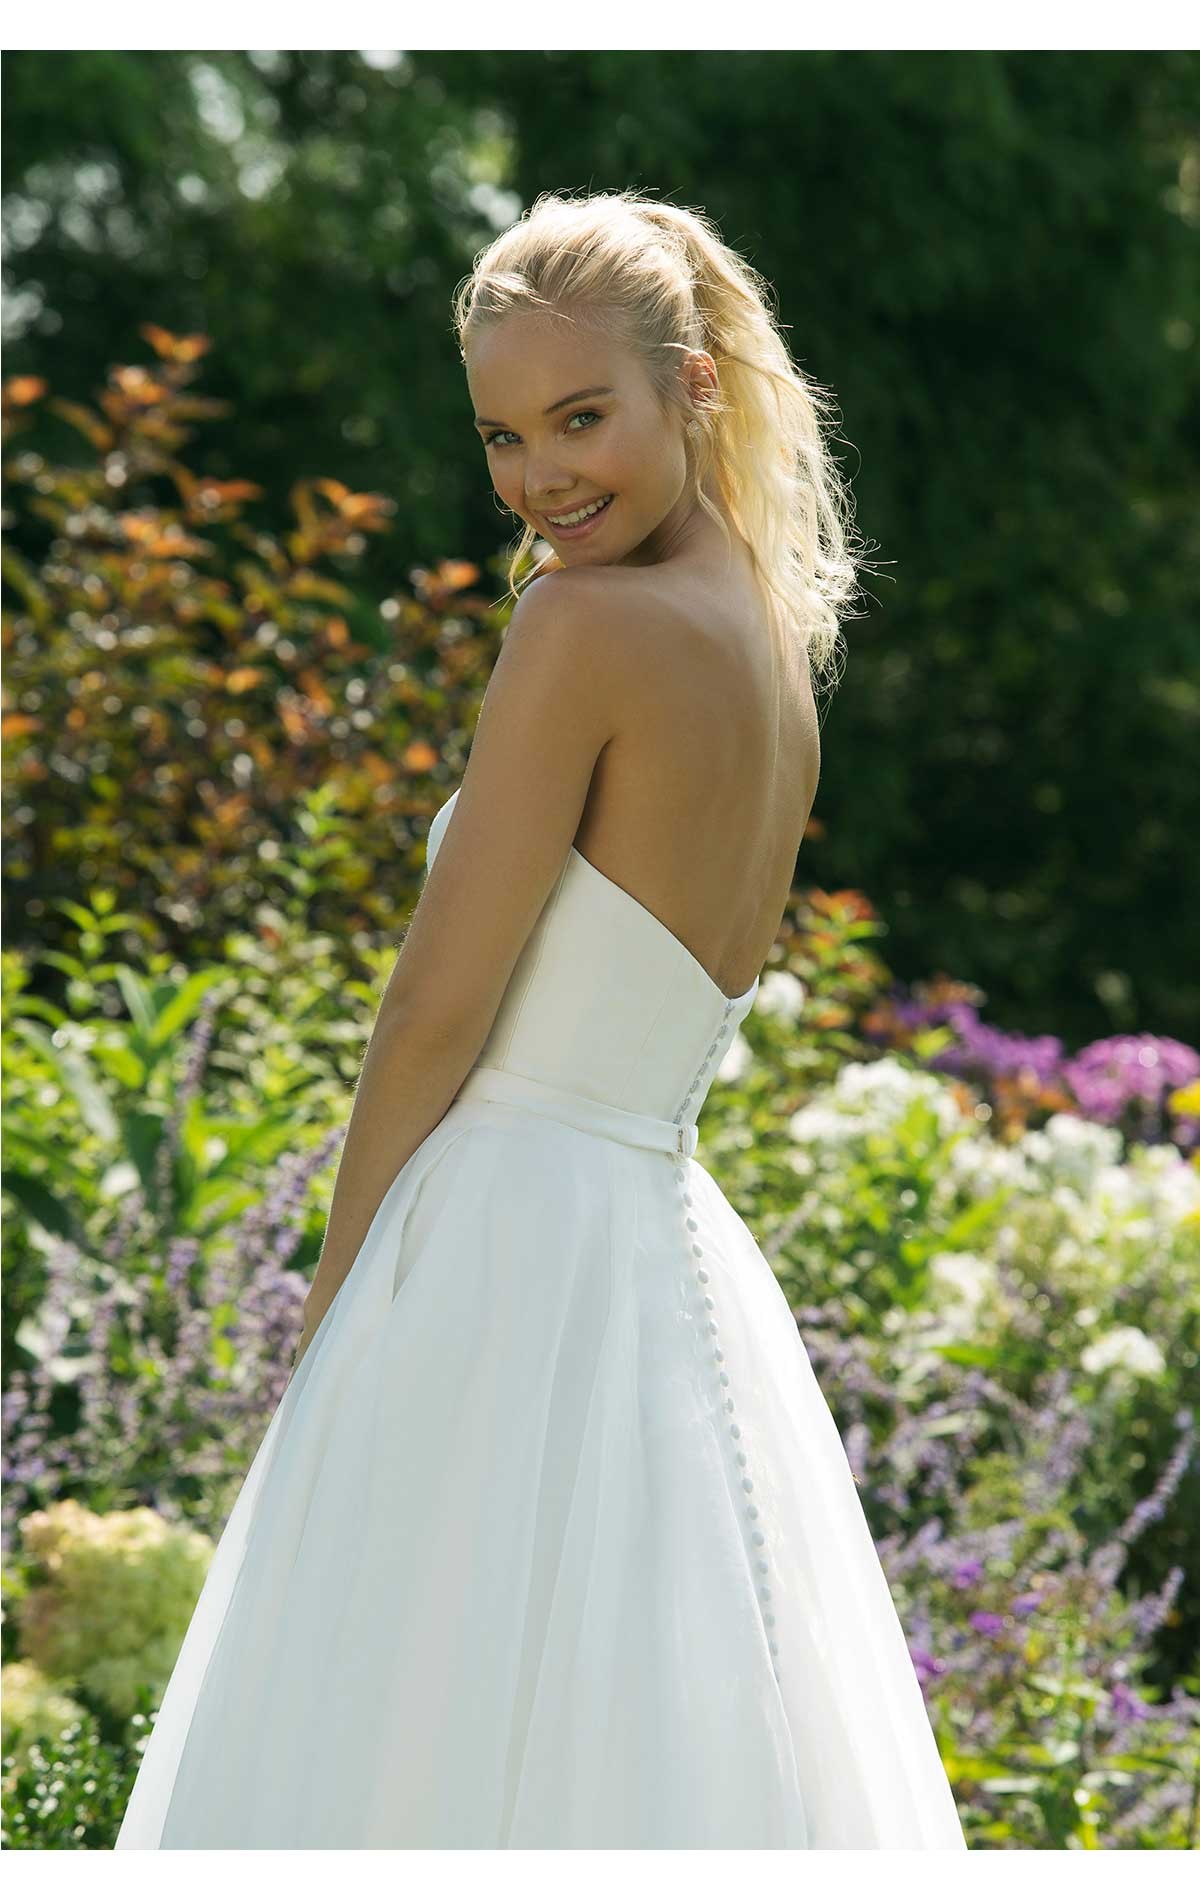 11005 - Sade Size 12 - Sweetheart 11005, Modern Mikado wedding dress with A-line Organza skirt featuring on trend pockets.   Affordable Wedding Dresses at Blessings Bridal Shop, Westdene, Brighton, East Sussex, BN1 5GG. Telephone: 01273 505766